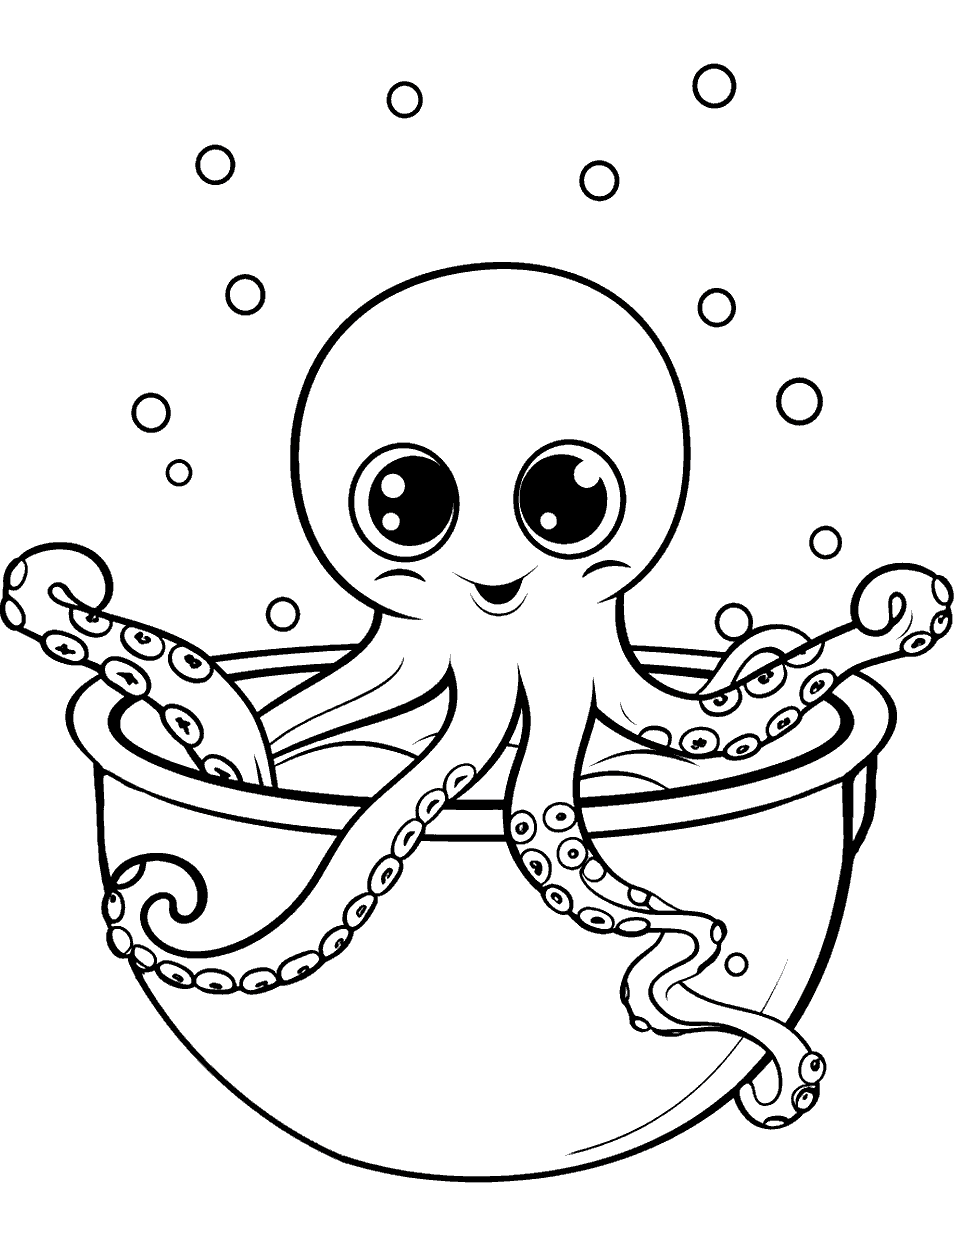 Octopus in a Bubble Bath Coloring Page - An octopus enjoying a relaxing bubble bath in a large tub.